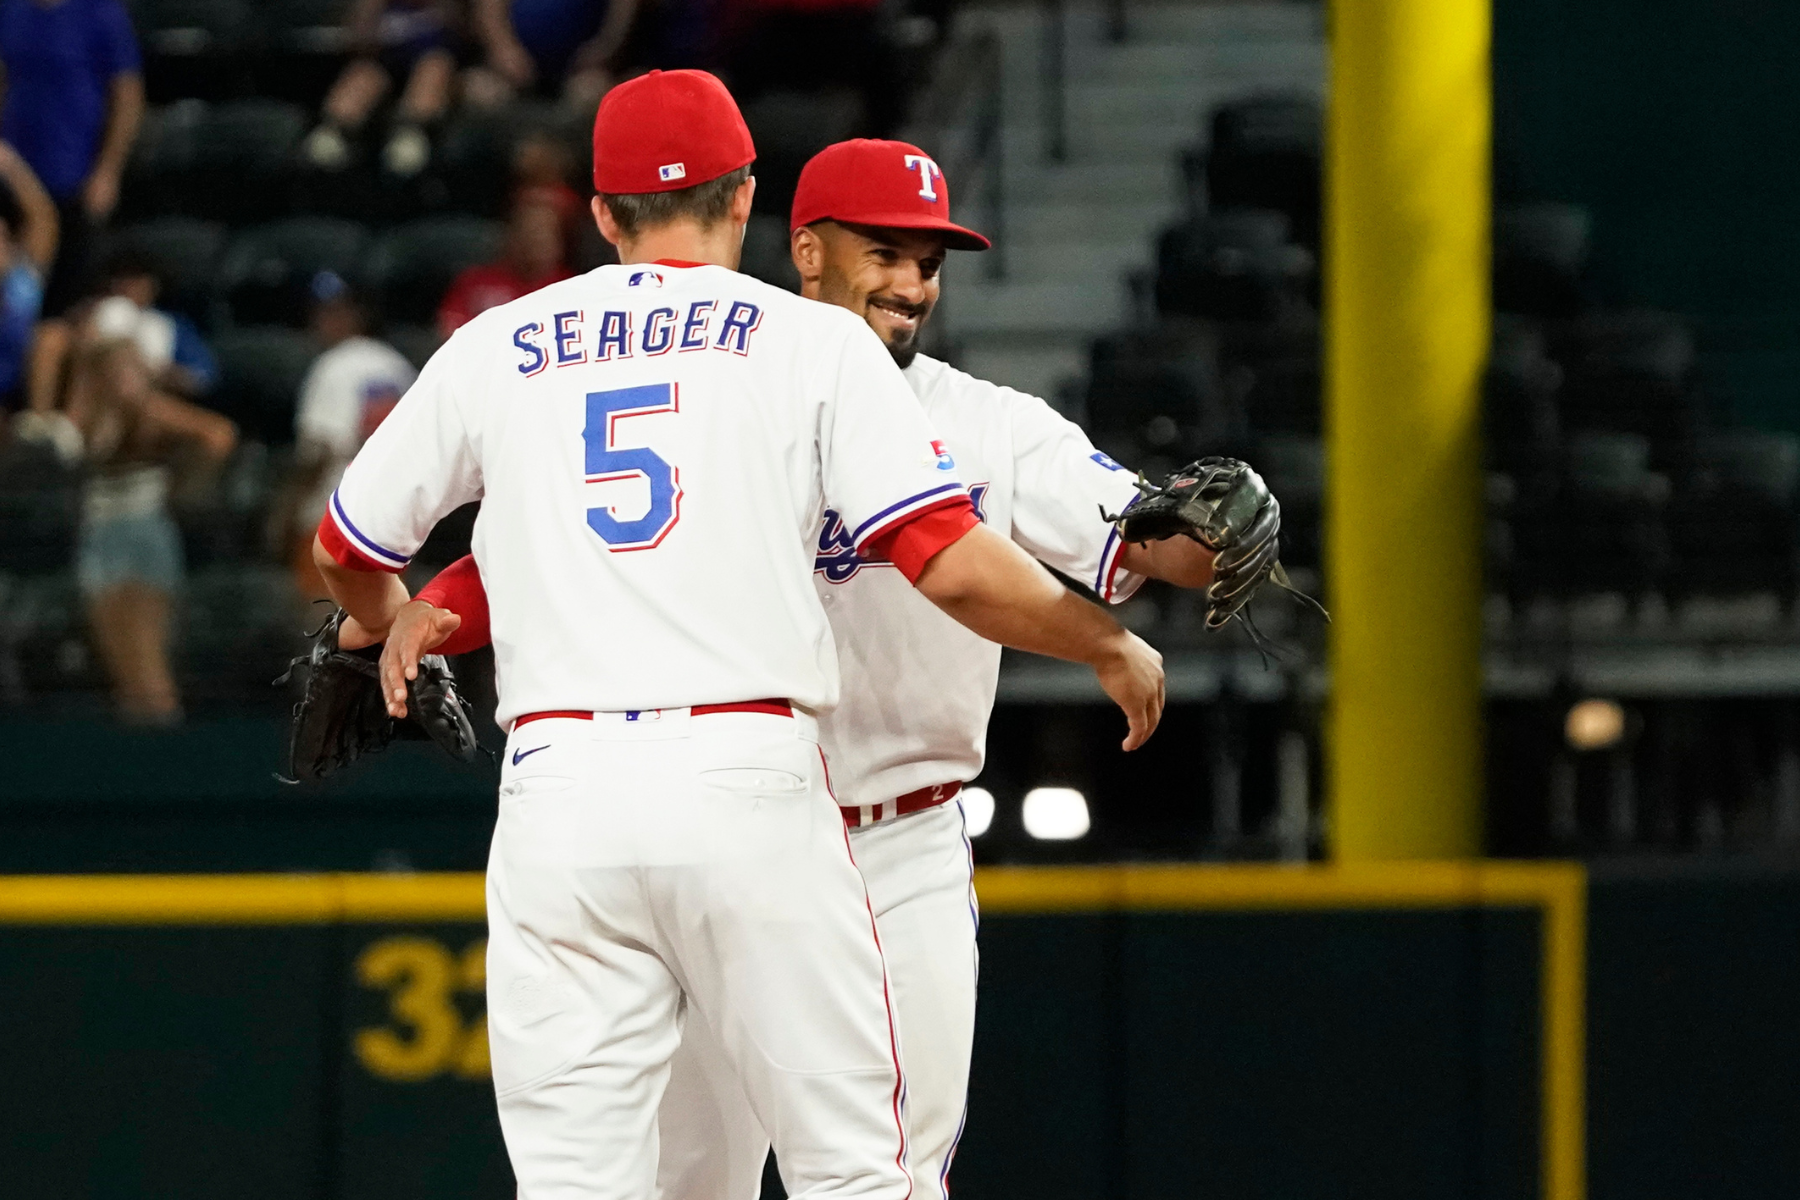 New Rangers Seager, Semien turn focus to on-field matters